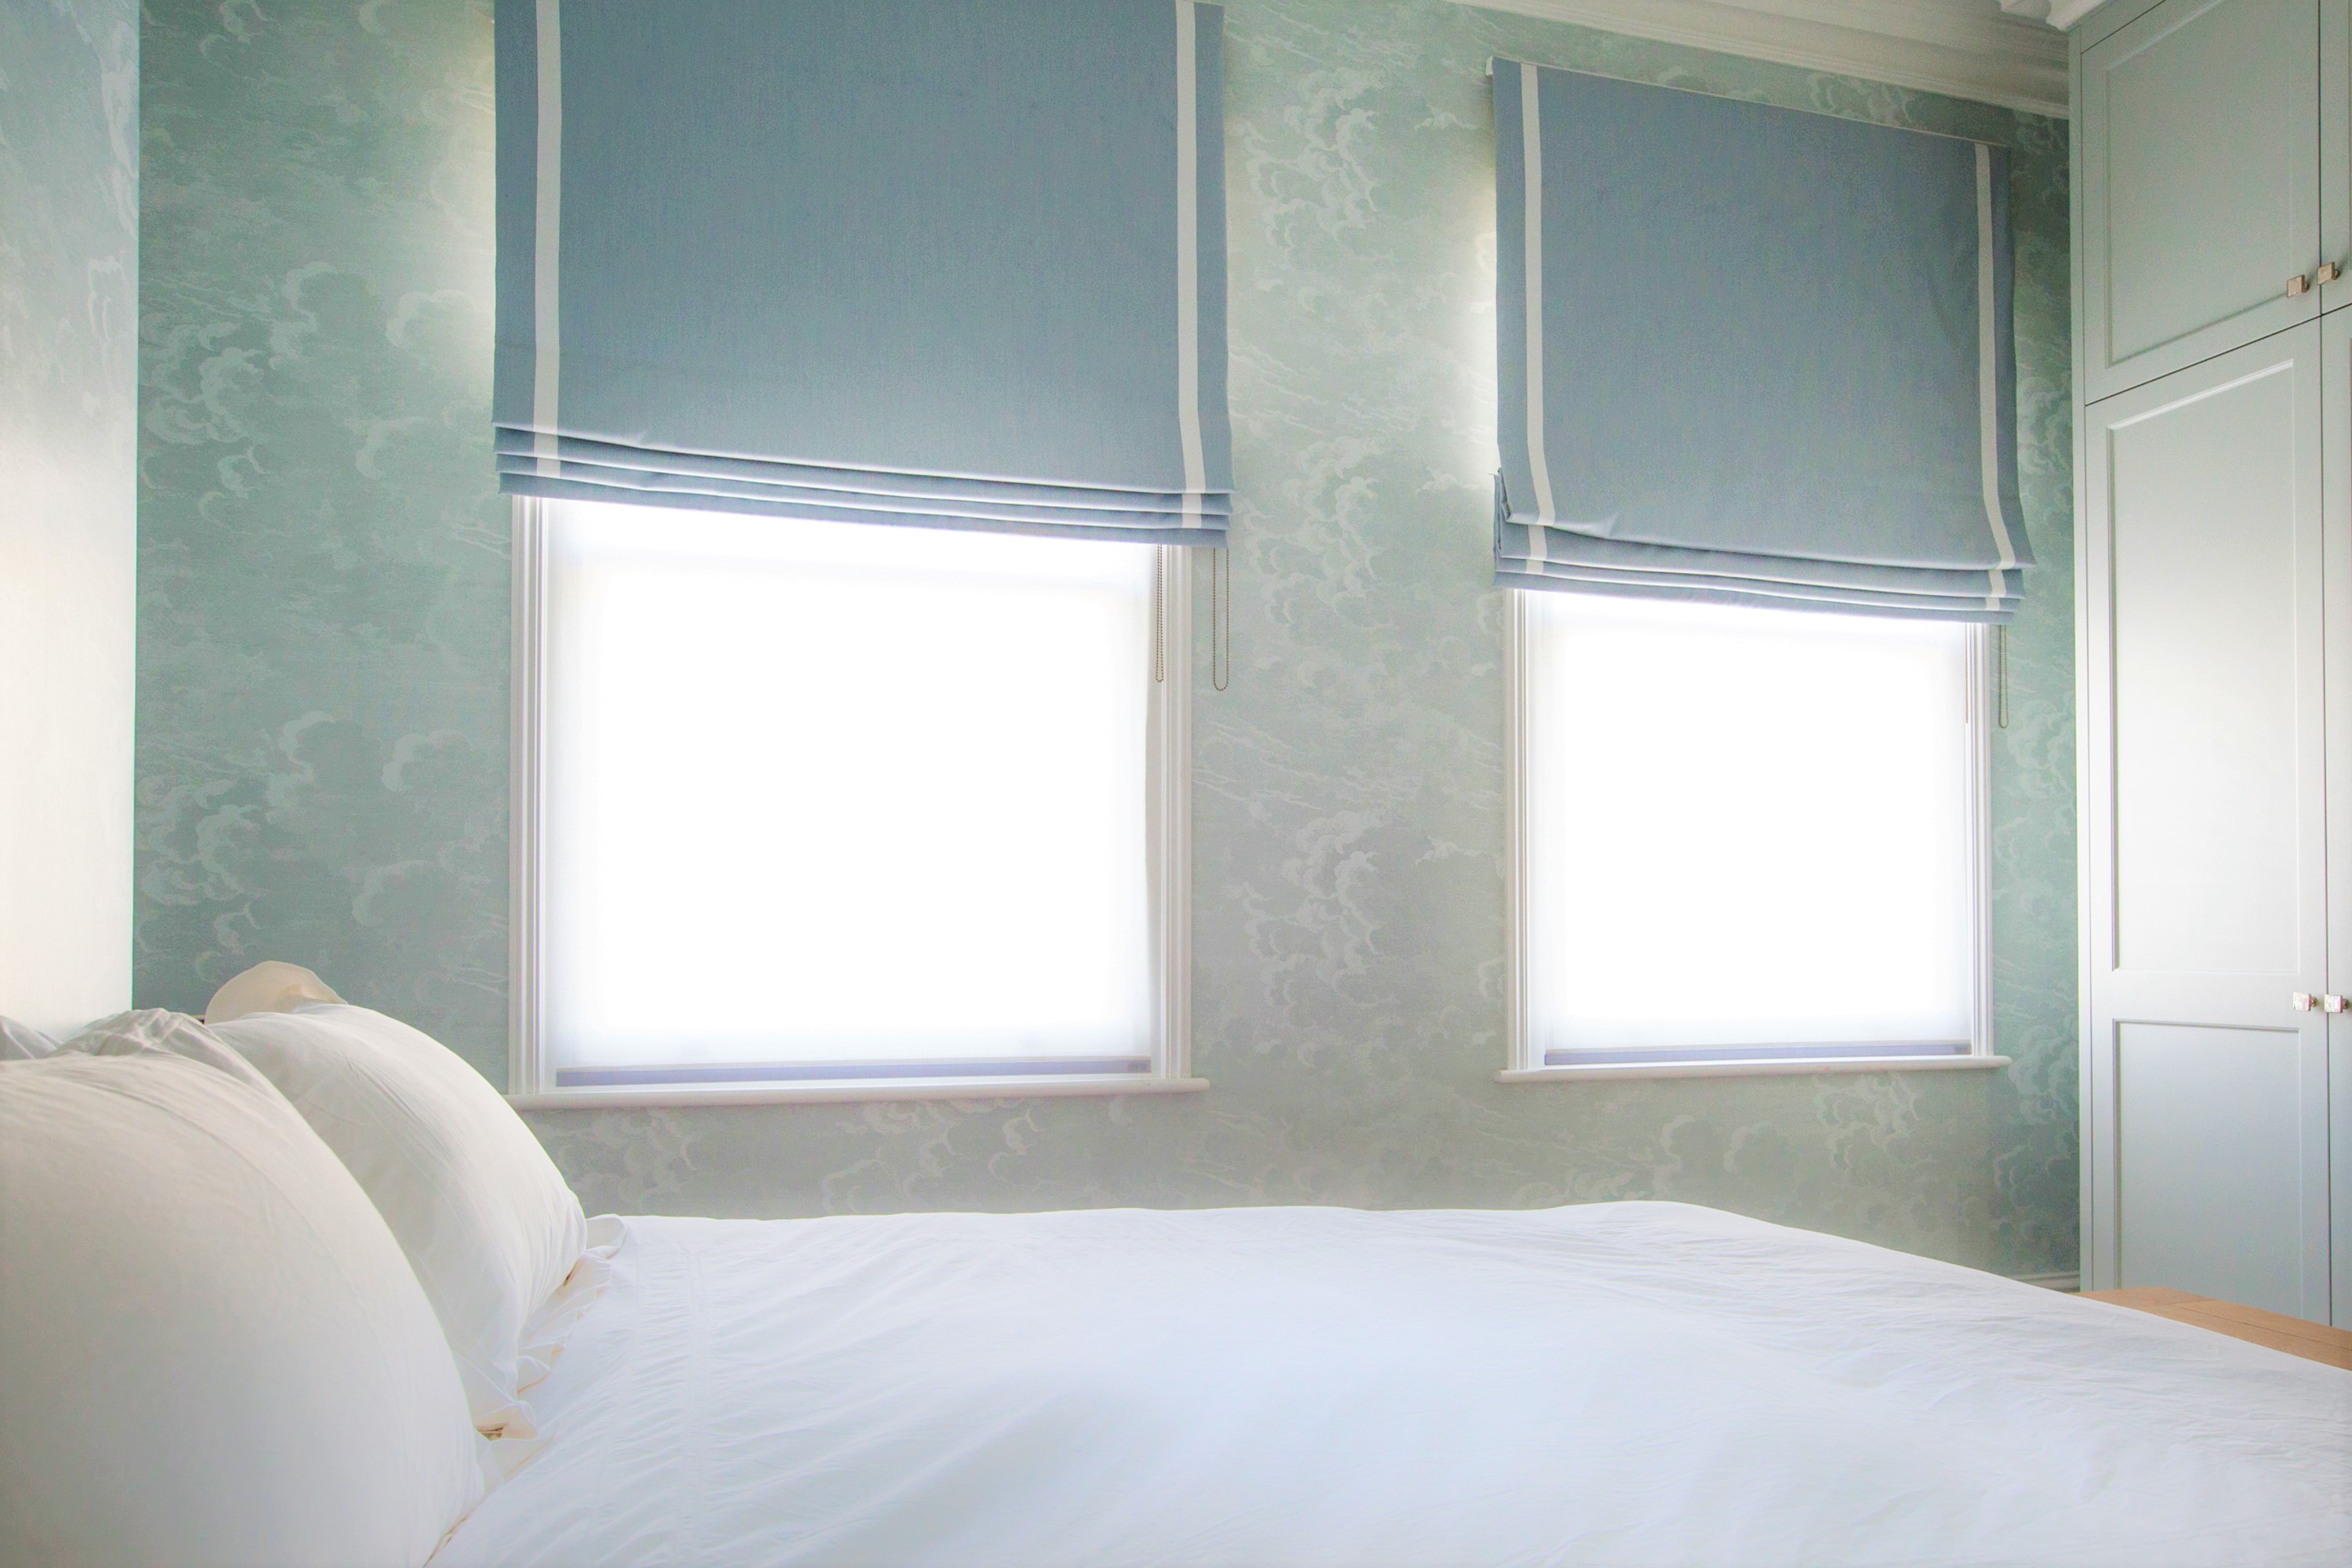 A dreamy and peaceful guest bedroom; cloud patterned wallpaper of heavenly blues ties in with the blue roman blinds